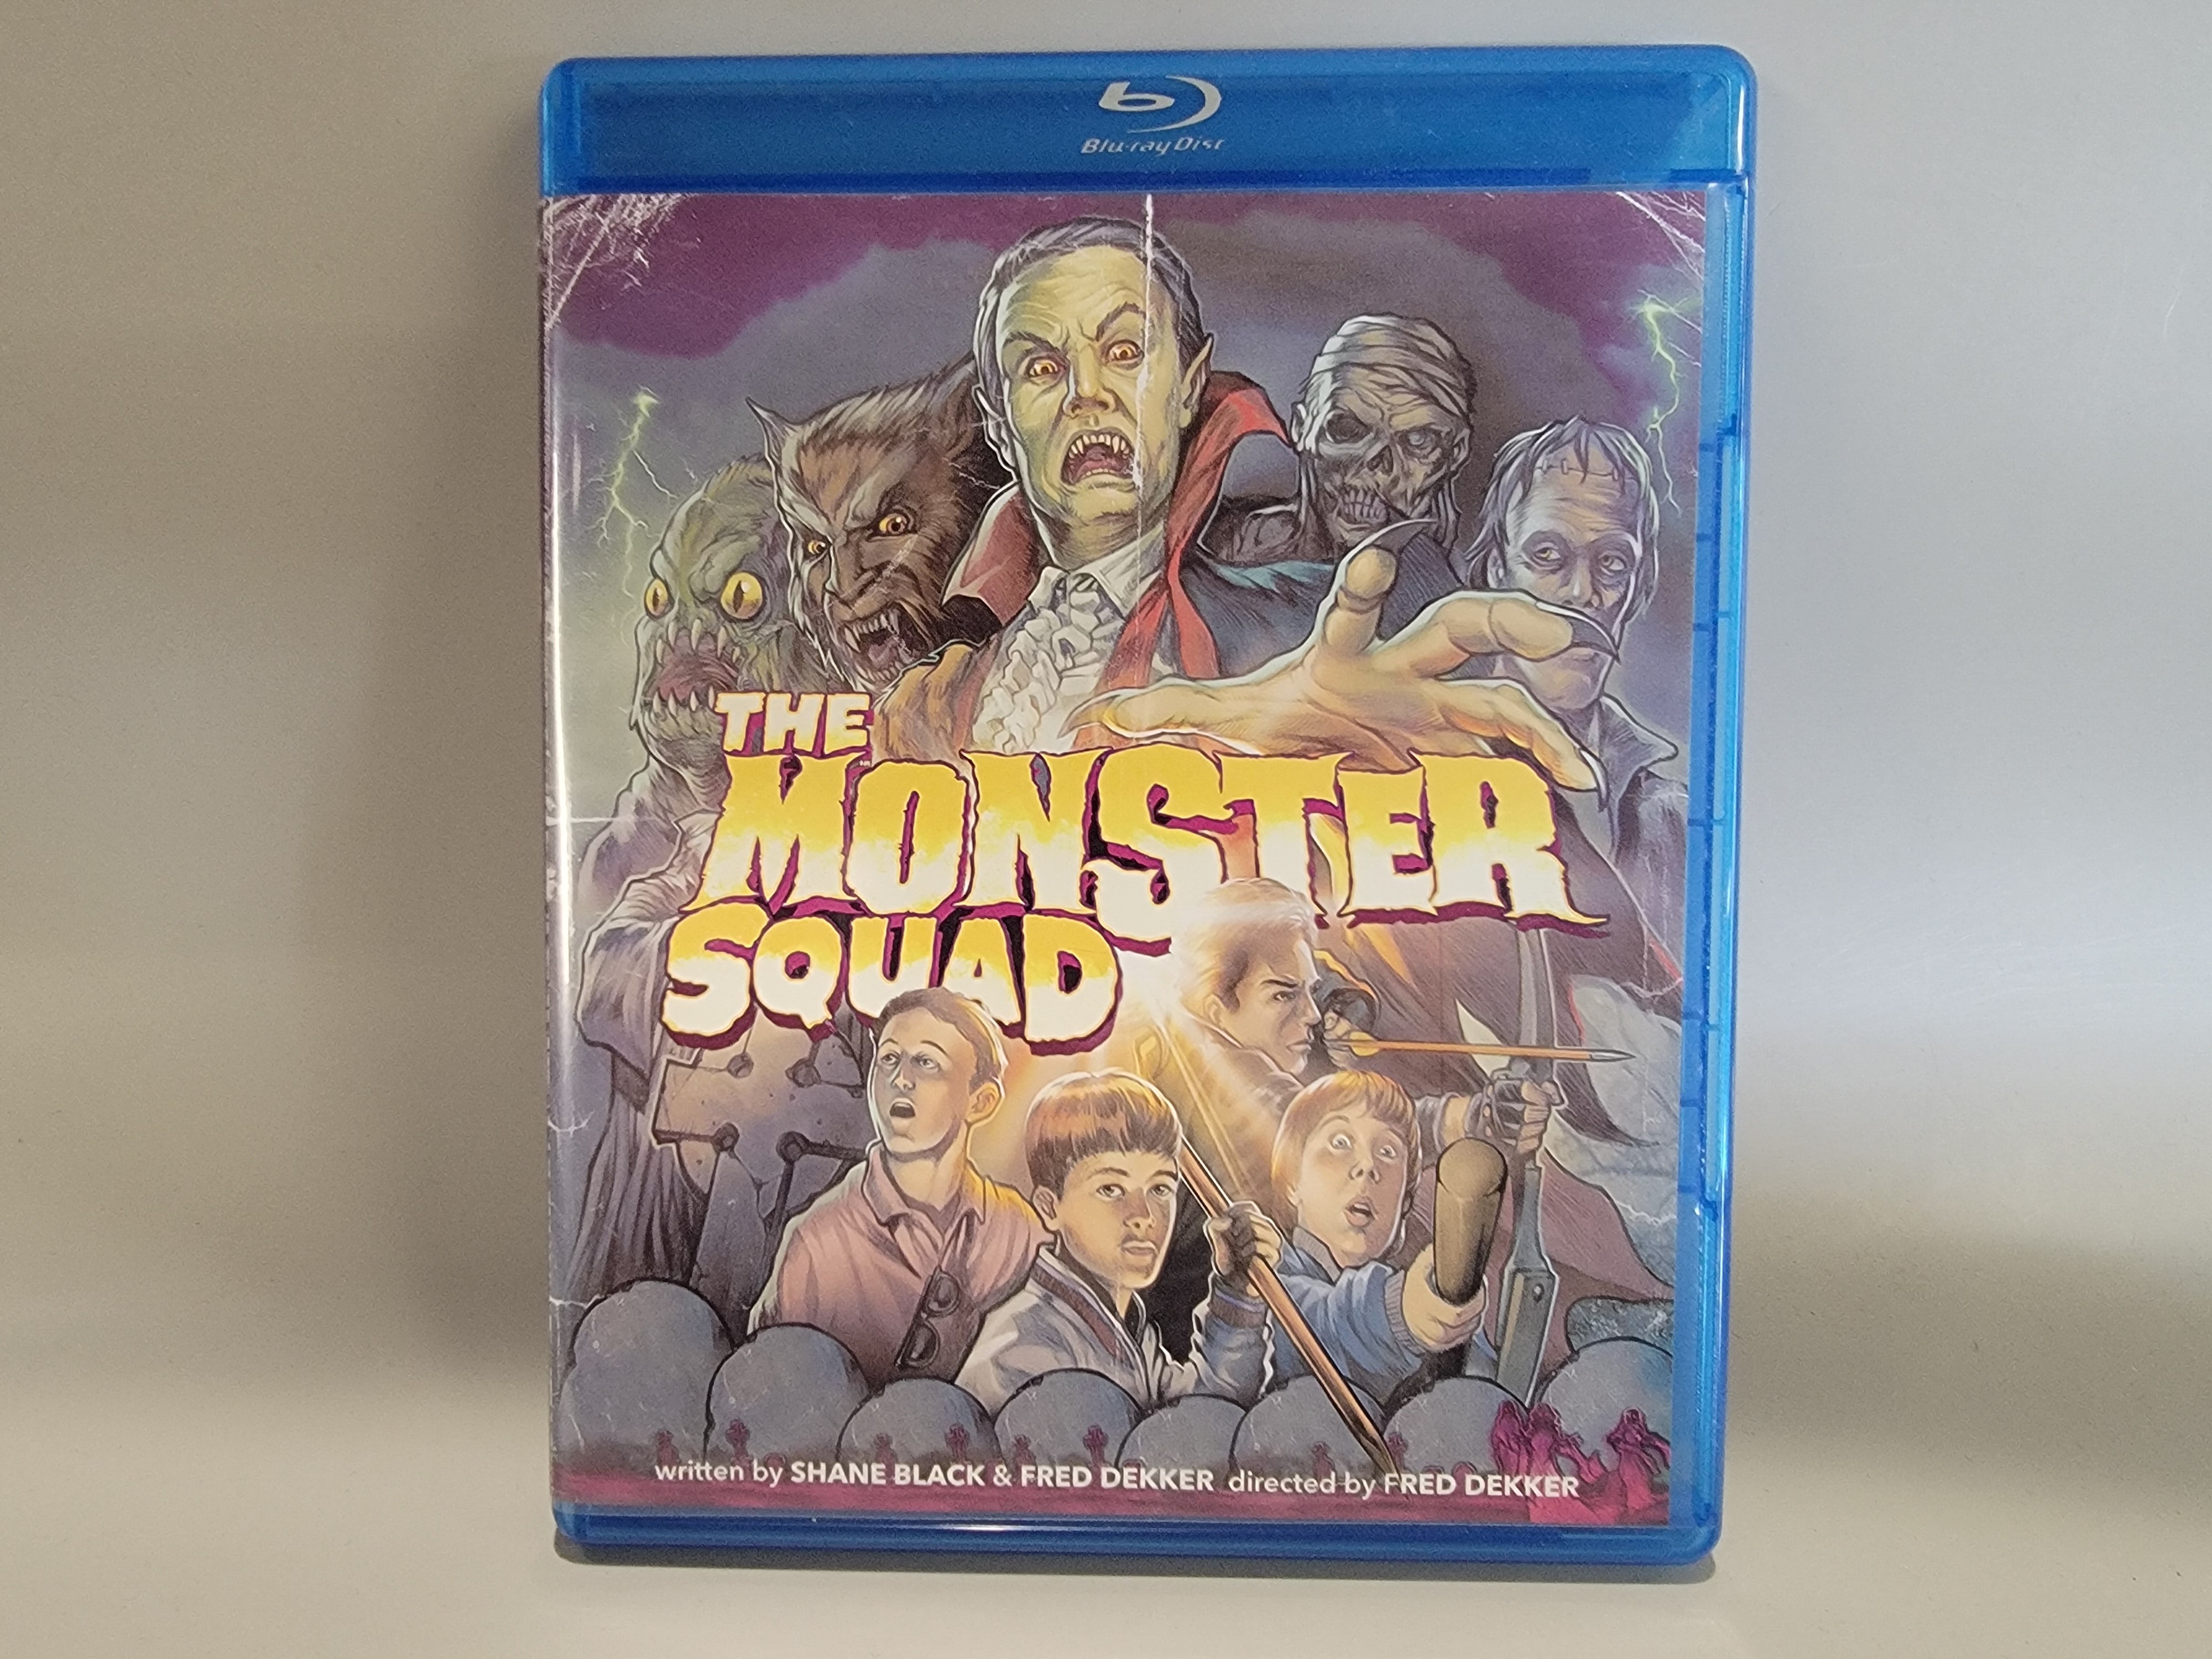 THE MONSTER SQUAD BLU-RAY [USED]